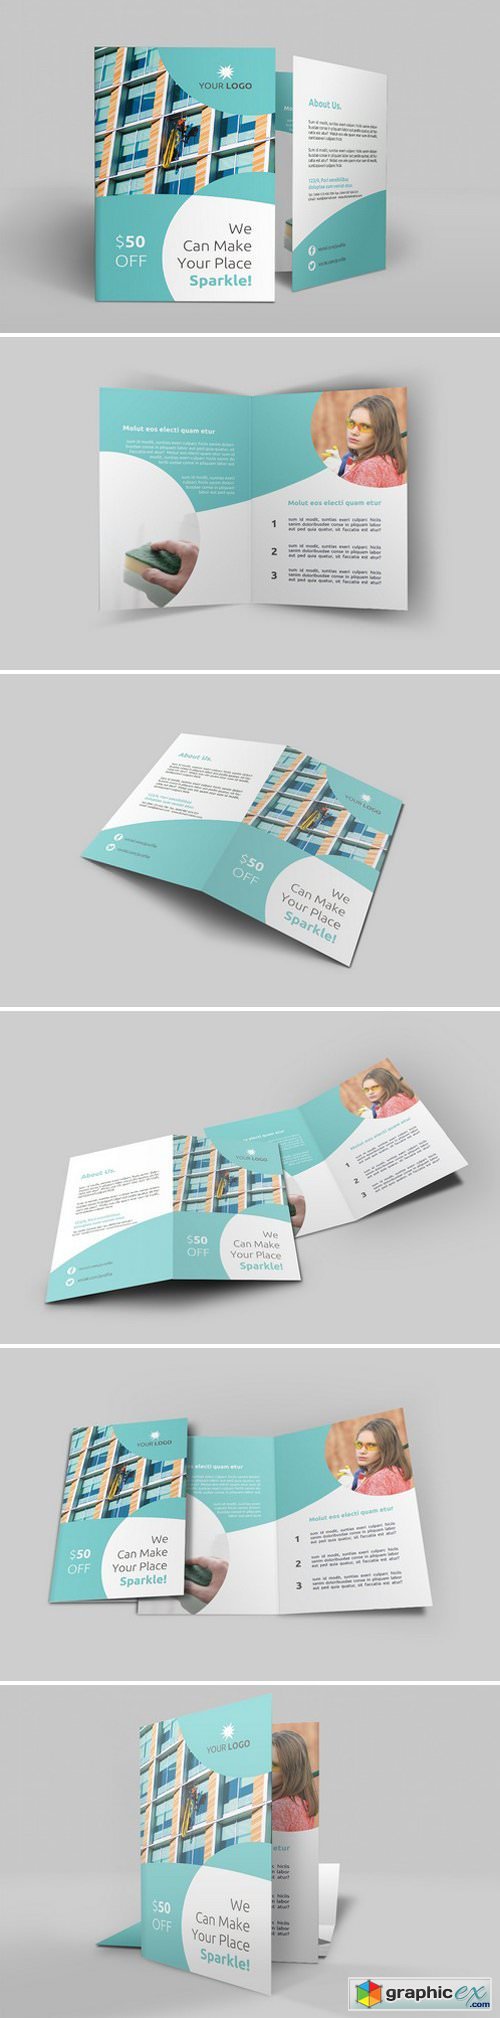 Cleaning Services Bi-Fold Brochure 1975372